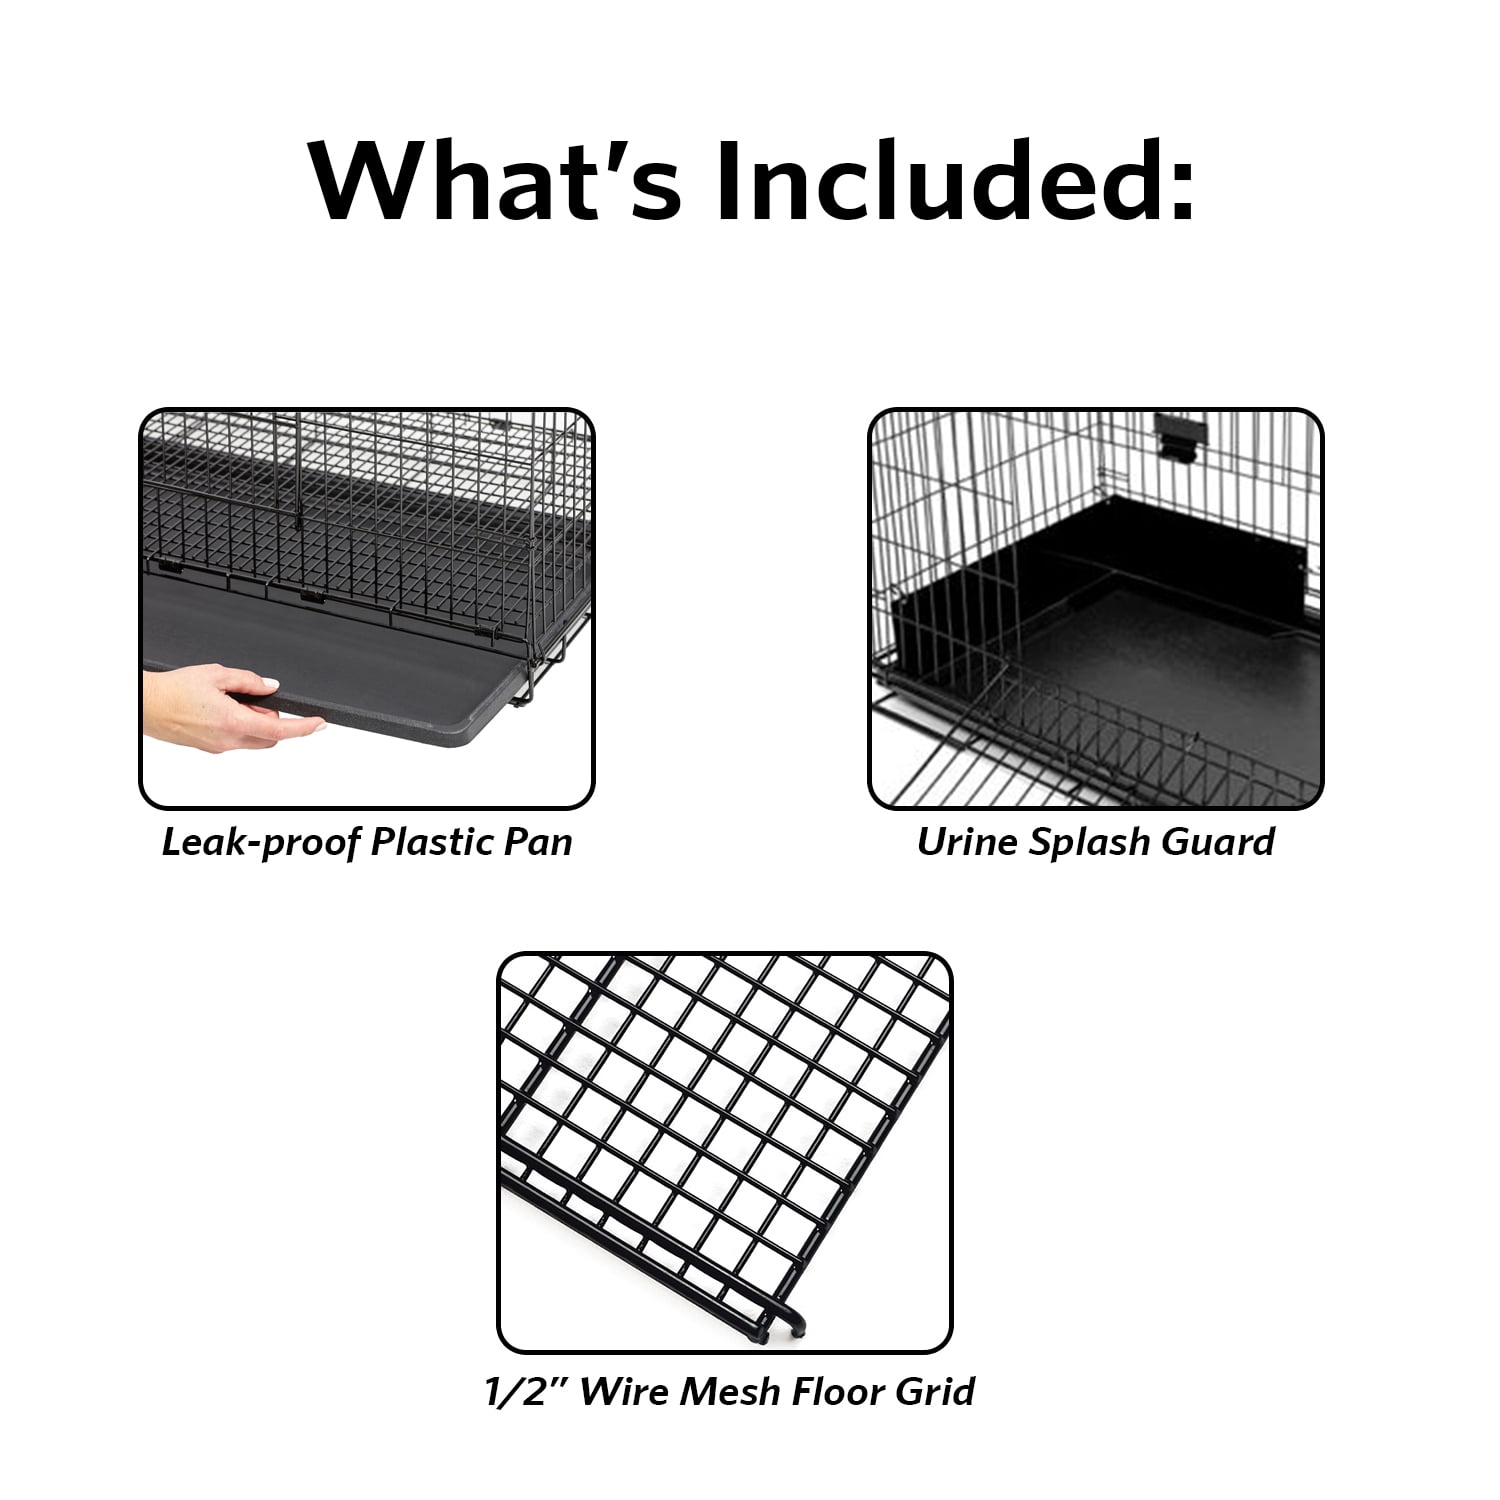 Includes 1//2 inch hygienic floor grid /& Top Front Door Access MidWest Folding Metal Rabbit Cage